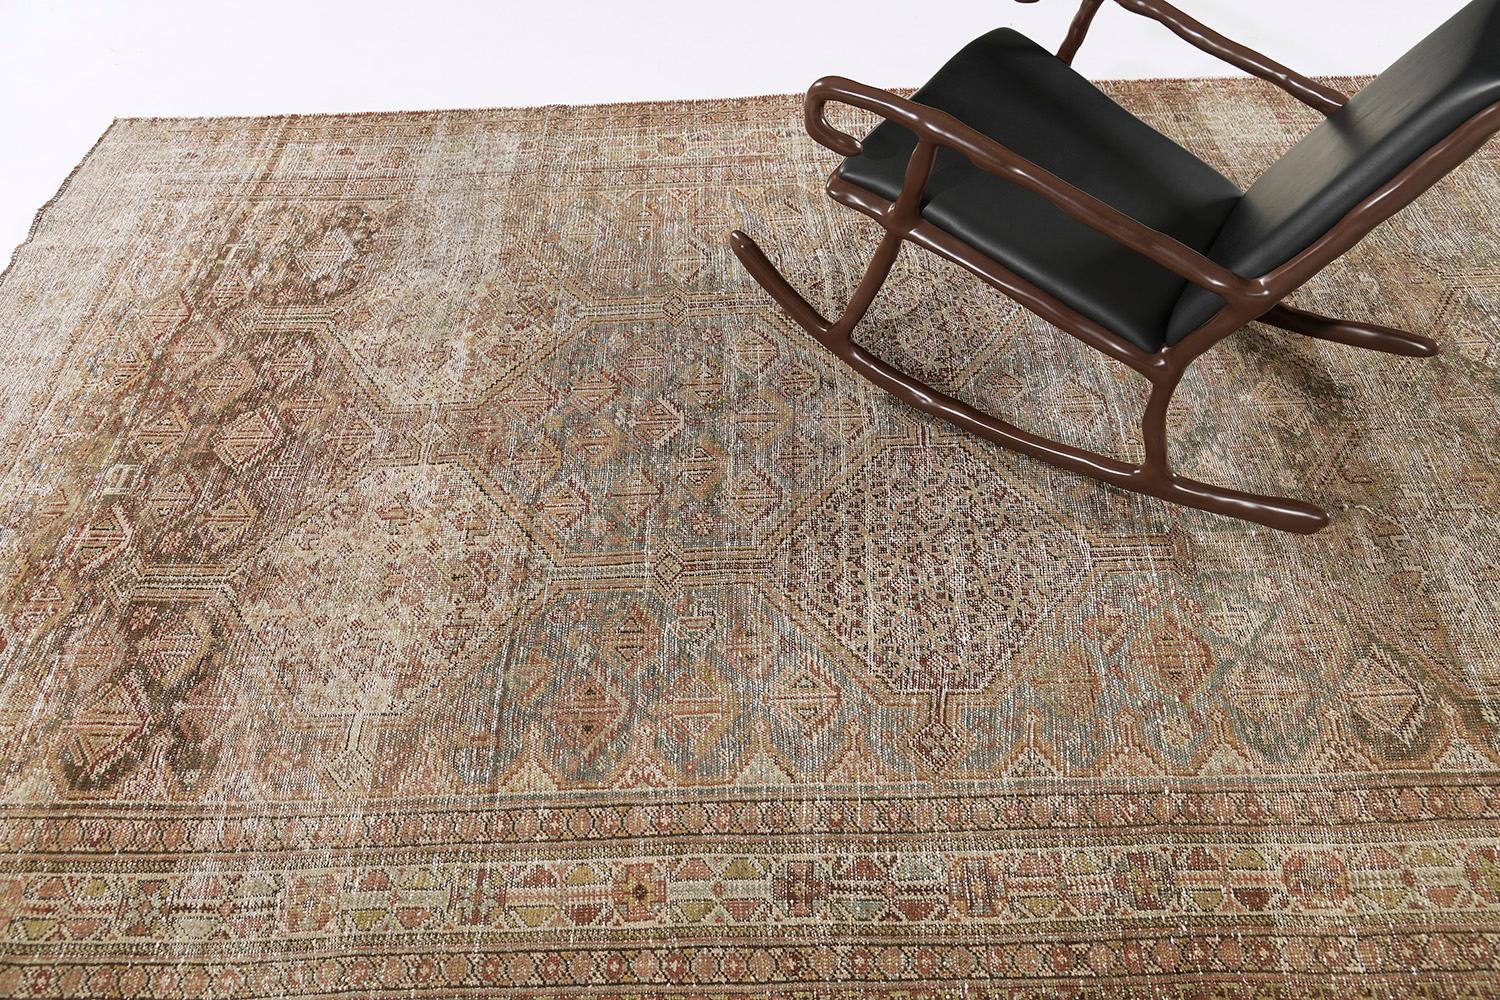 This antique Persian Shiraz rug features a phenomenal geometric panel design in alternating symbolical patterns. Tones of pleasant earthy colours of warm tan and pale gold predominate all over this compelling work of art. Perfect to wide range of